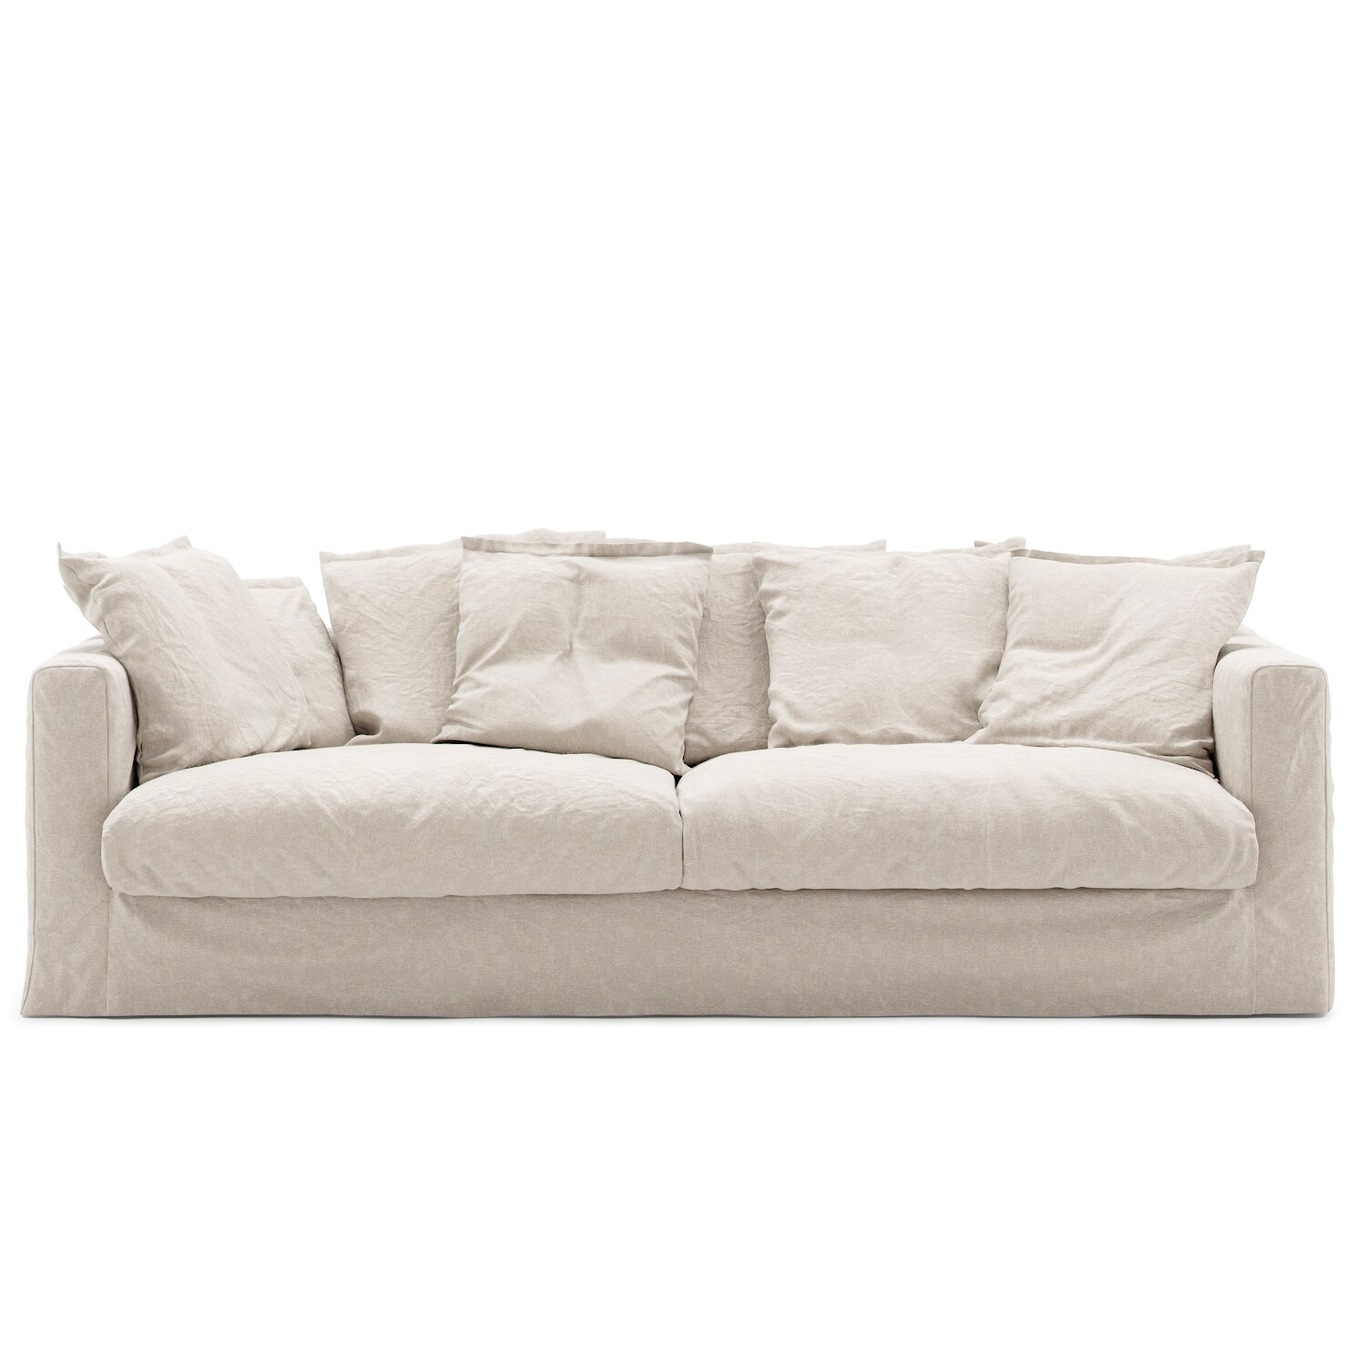 Le Grand Air Upholstery 3-Seater Linen, Creamy White